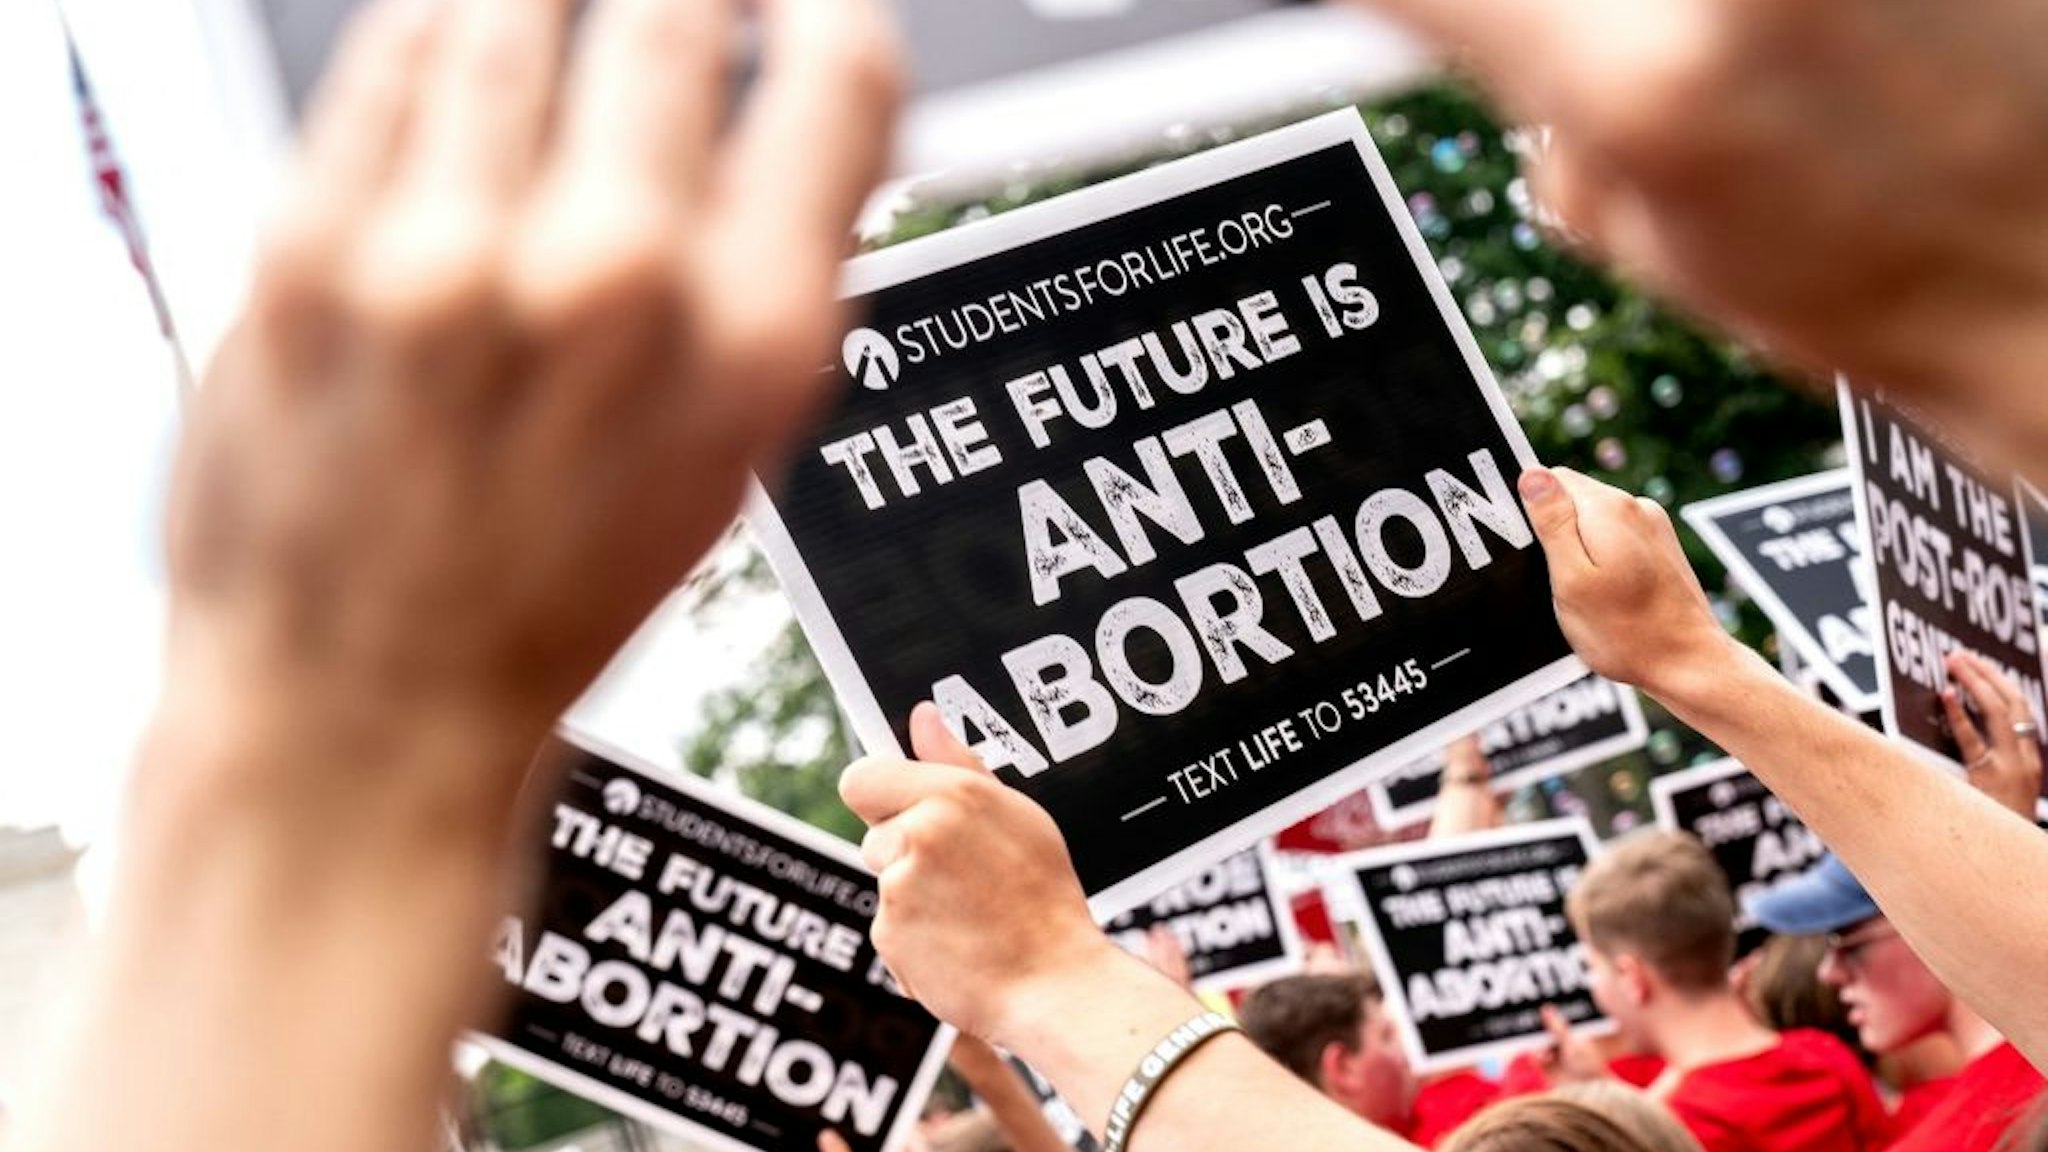 Anit-abortion activists hold signs outside the US Supreme Court in Washington, DC, on June 24, 2022. - The US Supreme Court on Friday ended the right to abortion in a seismic ruling that shreds half a century of constitutional protections on one of the most divisive and bitterly fought issues in American political life. The conservative-dominated court overturned the landmark 1973 "Roe v Wade" decision that enshrined a woman's right to an abortion and said individual states can permit or restrict the procedure themselves. (Photo by Stefani Reynolds / AFP) (Photo by STEFANI REYNOLDS/AFP via Getty Images)